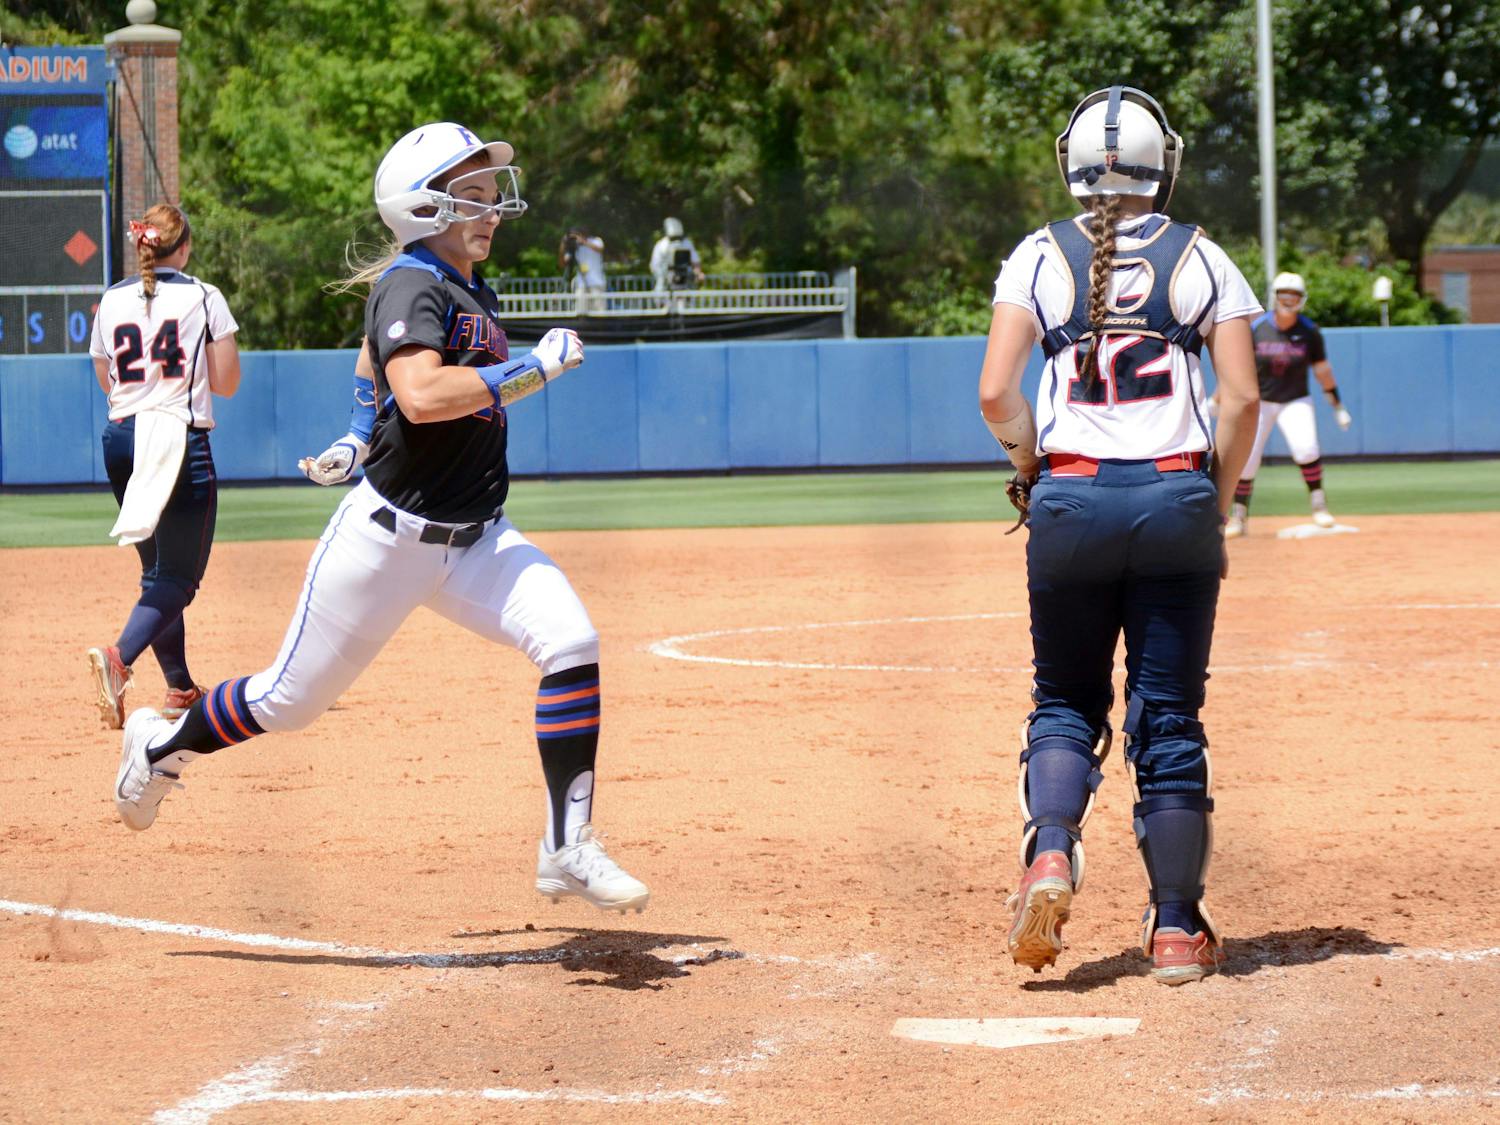 UF's Kirsti Merritt crosses home plate to score the lone run of the game in the eighth inning of Florida softball's 1-0 win against Florida Atlantic during the NCAA Regional finals on May 17, 2015, at Katie Seashole Pressly Stadium.